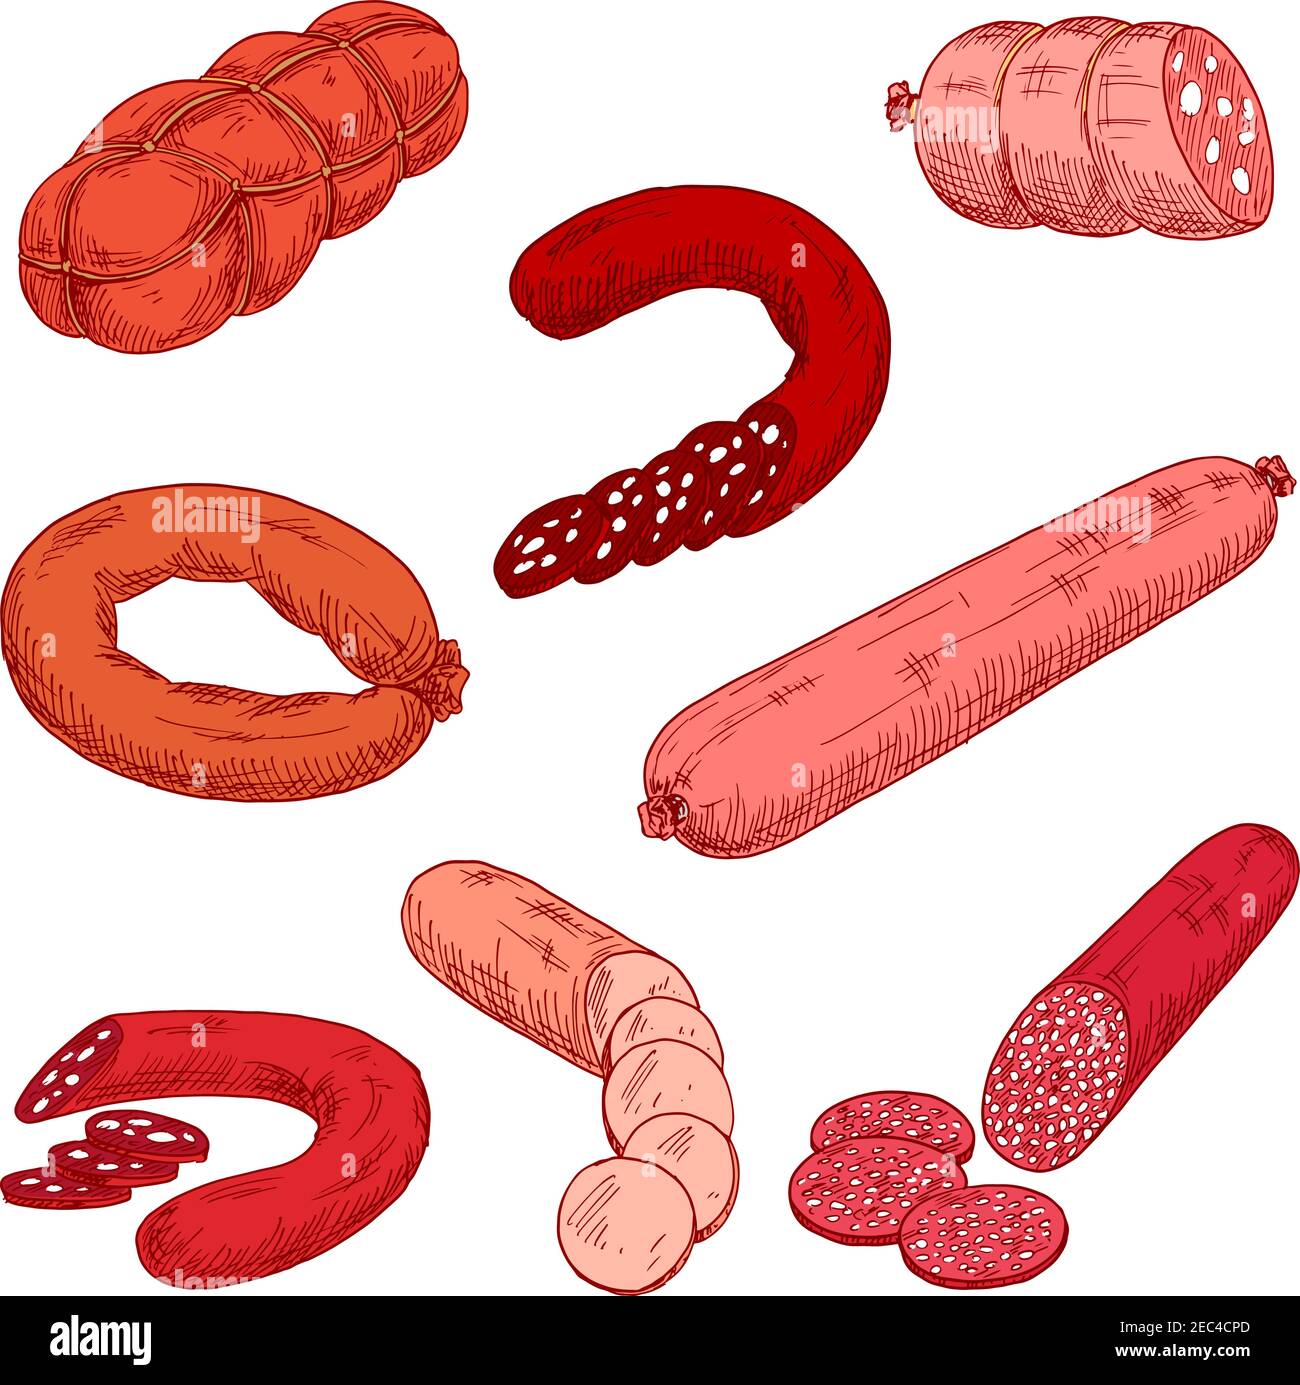 Sausage meat products like wurst or kielbasa. Food made of beef, pork or veal and starch that is grilled or baked. Concept of nutrition with Polish or Stock Vector